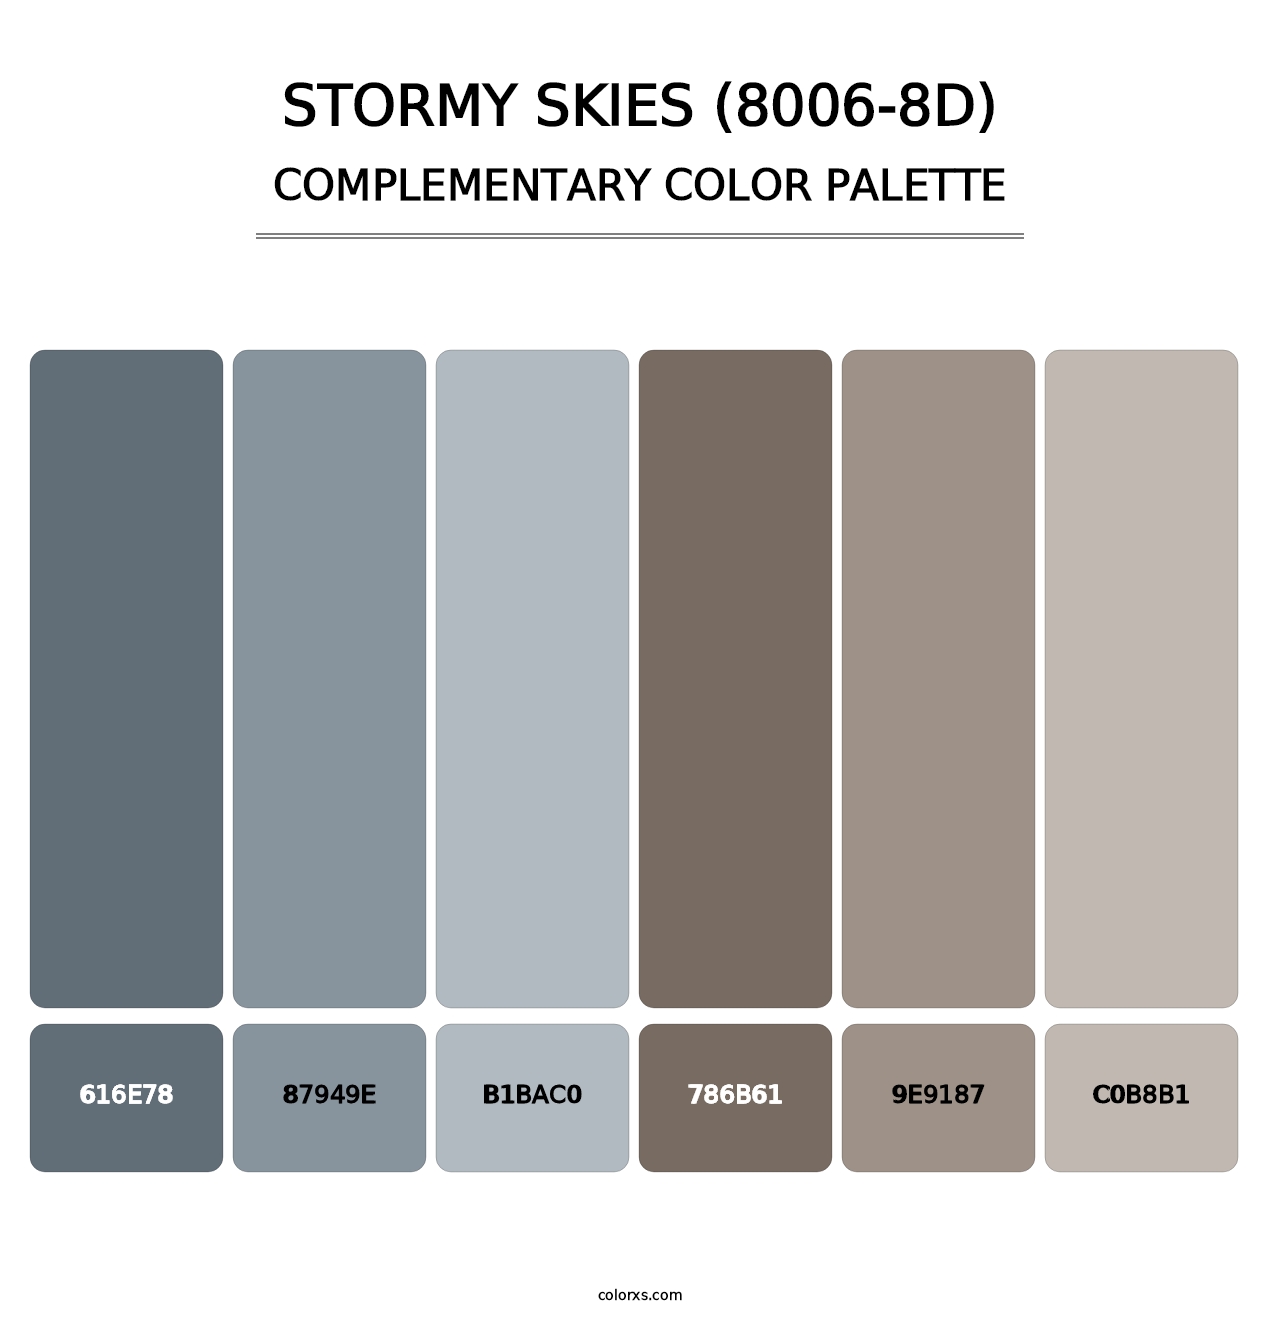 Stormy Skies (8006-8D) - Complementary Color Palette